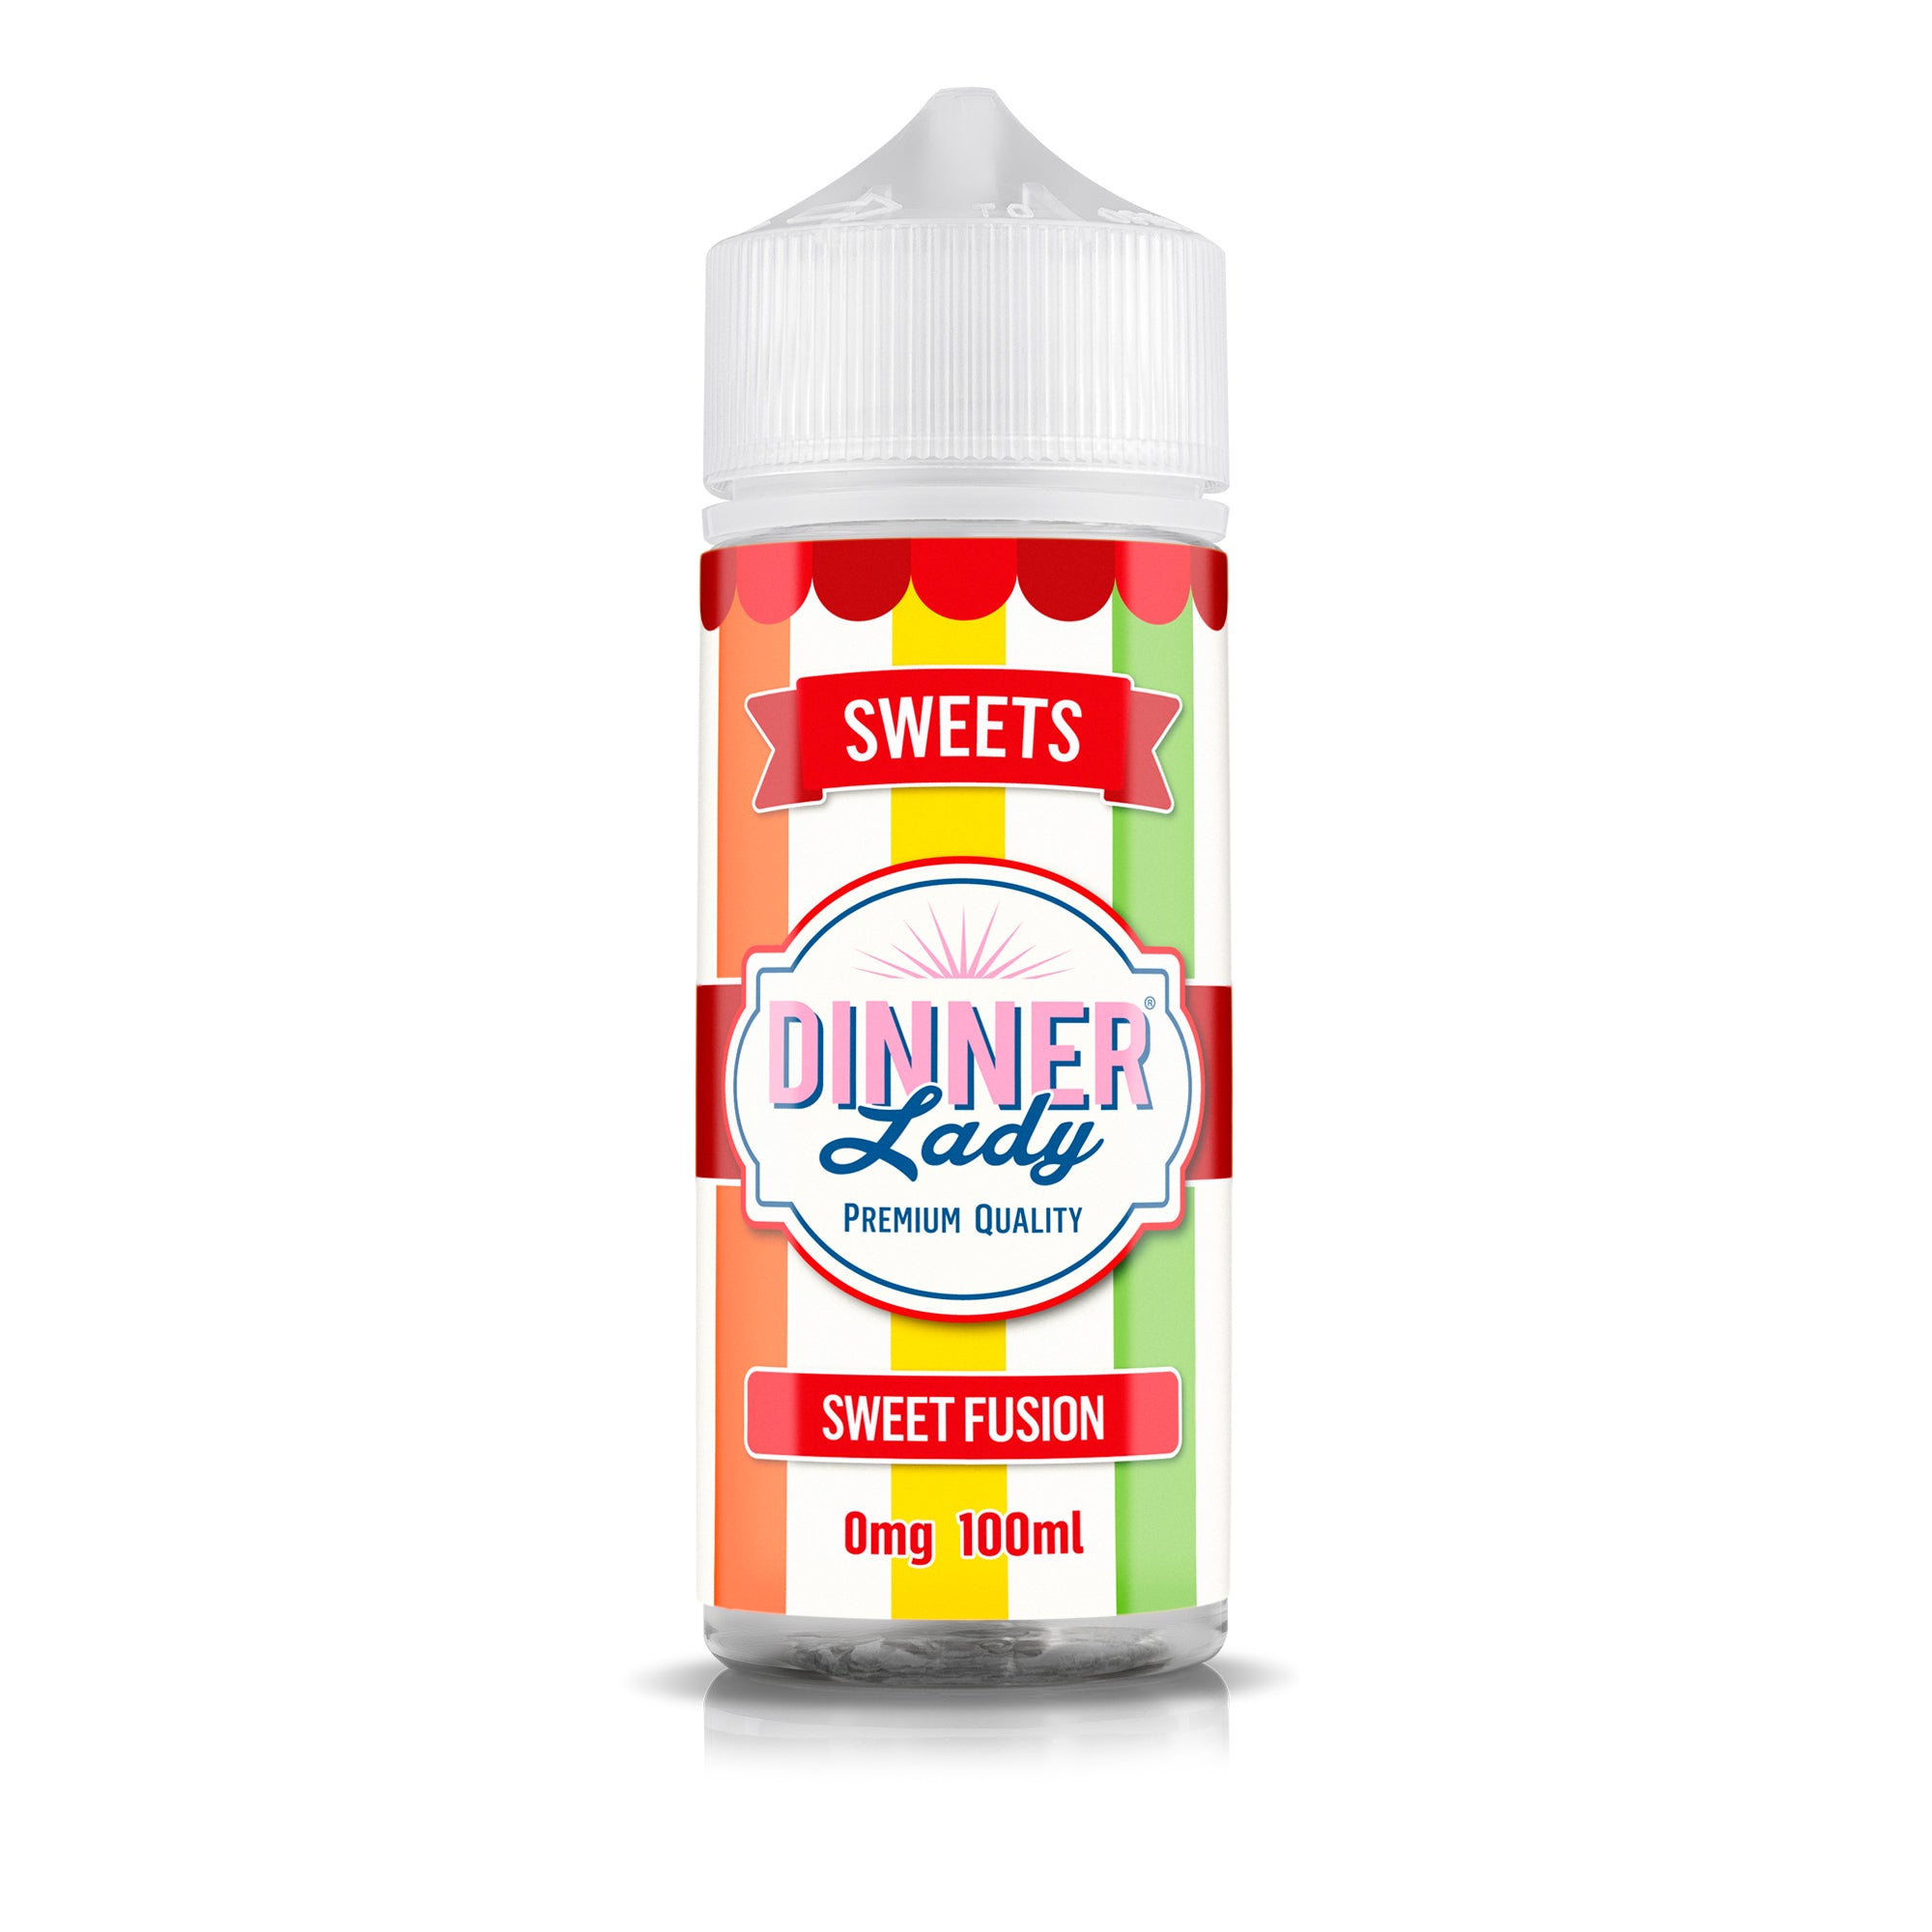 Dinner Lady | 100ml | Sweets | Sweet Fusion | Wholesale